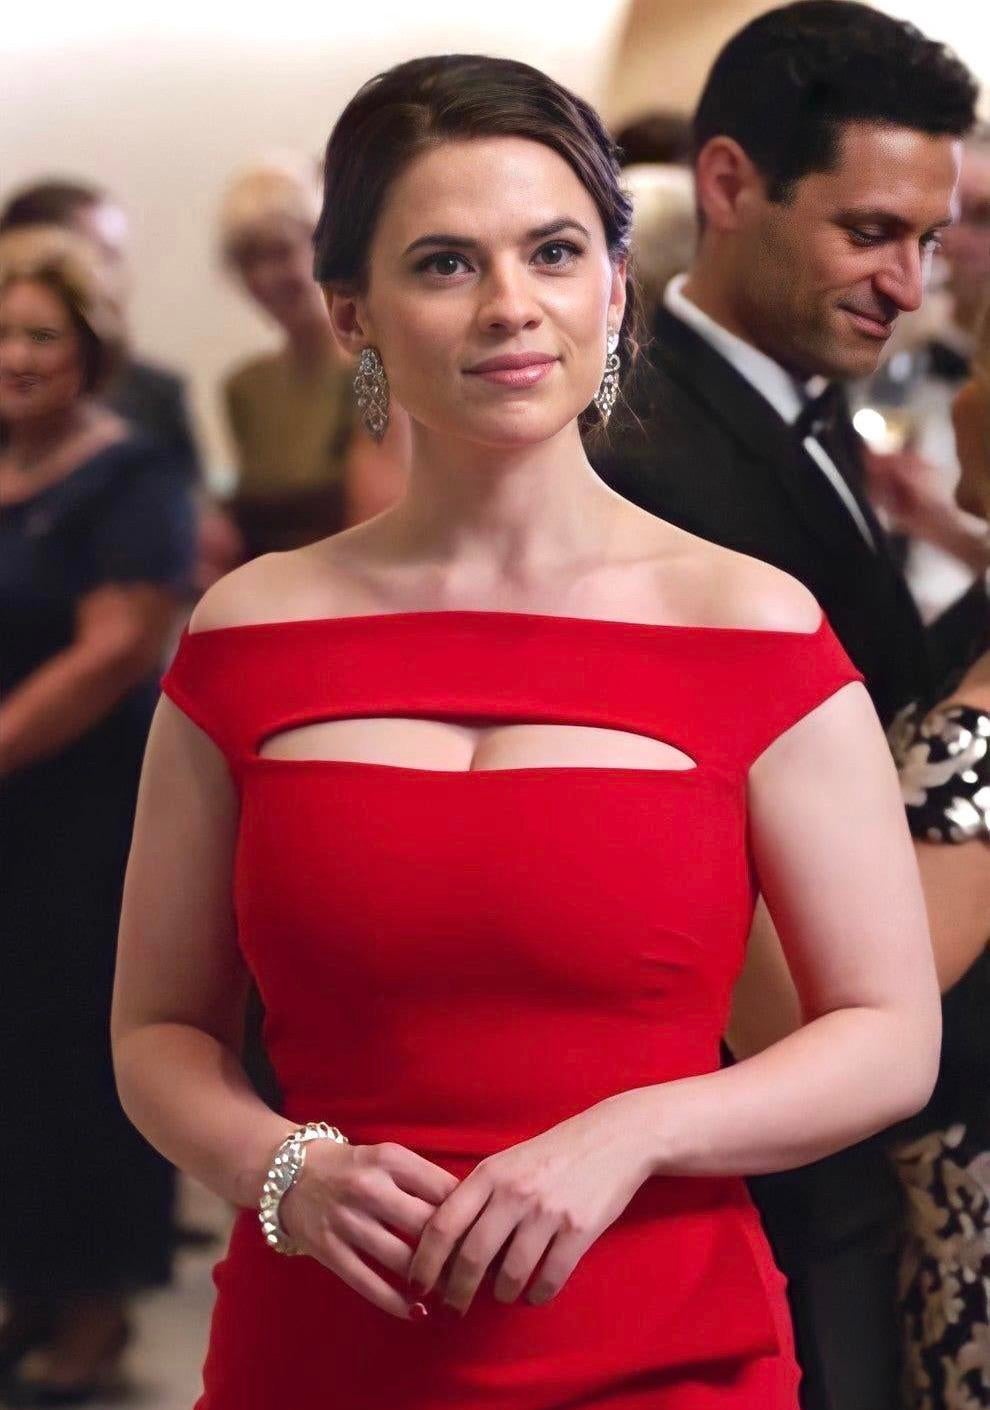 Hayley Atwell looking over the crowd 11